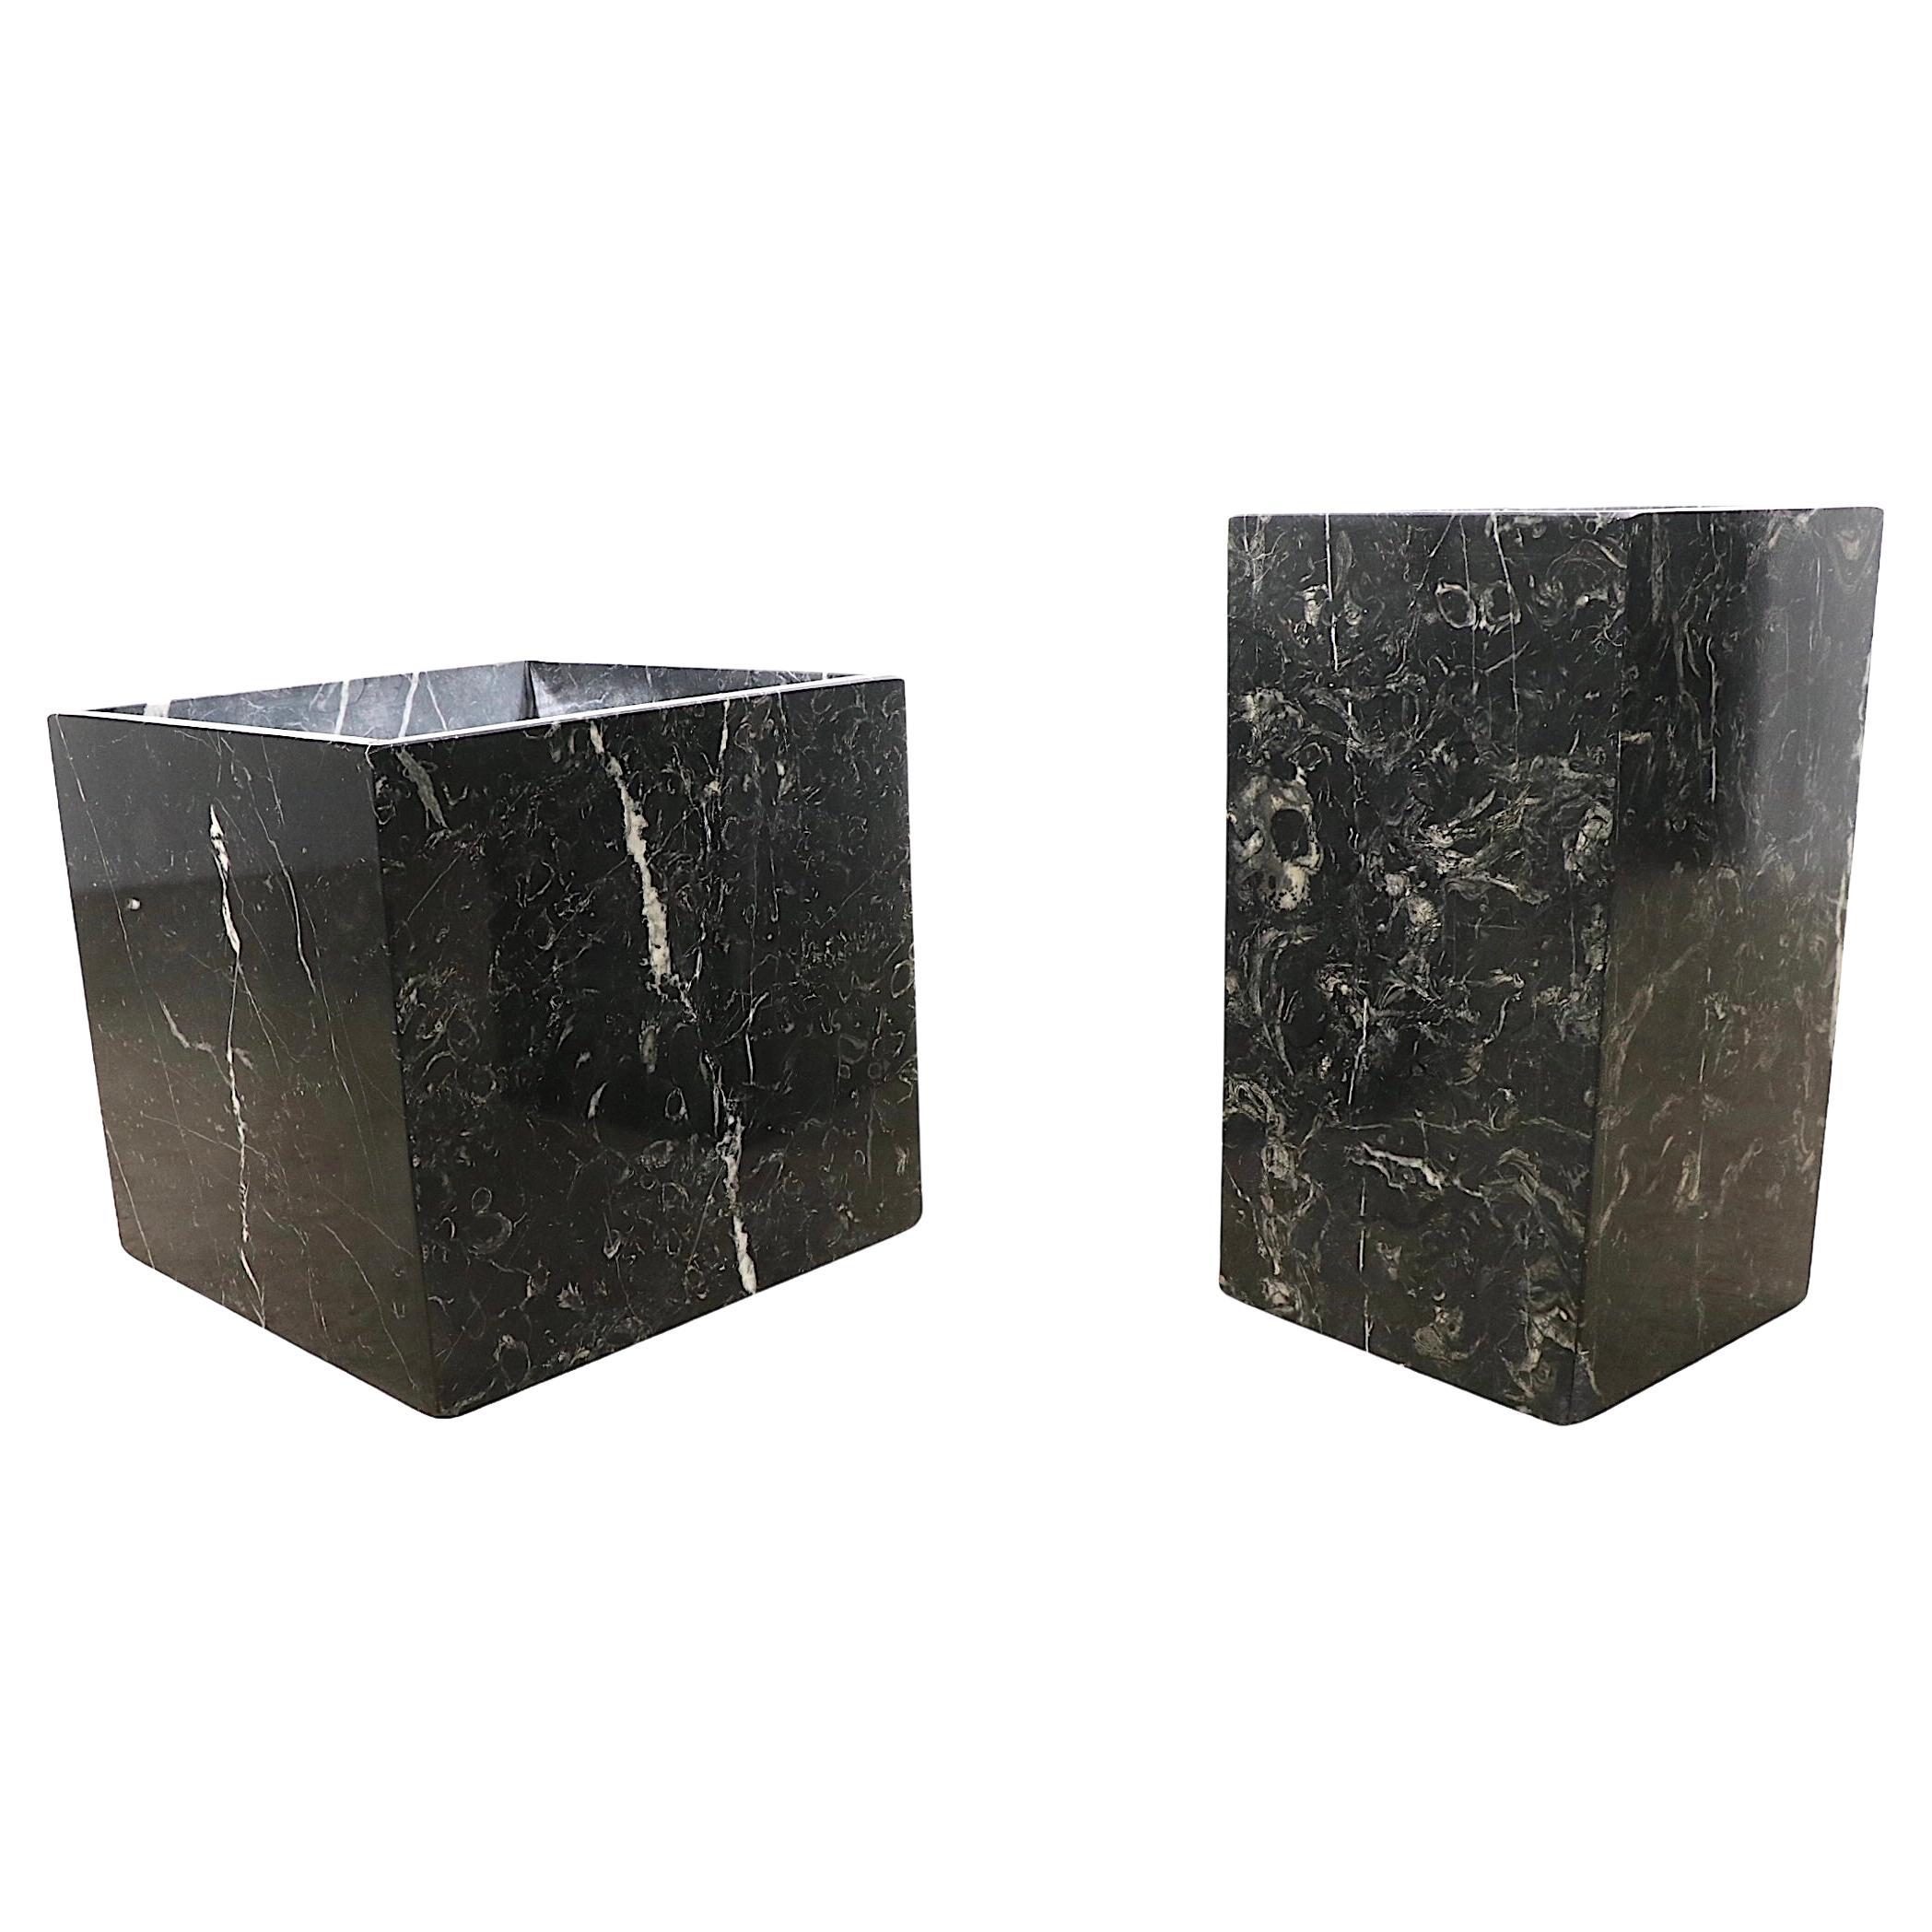 2 Black Marble Pedestal Bases Planters Table Bases c 1960/1970's For Sale